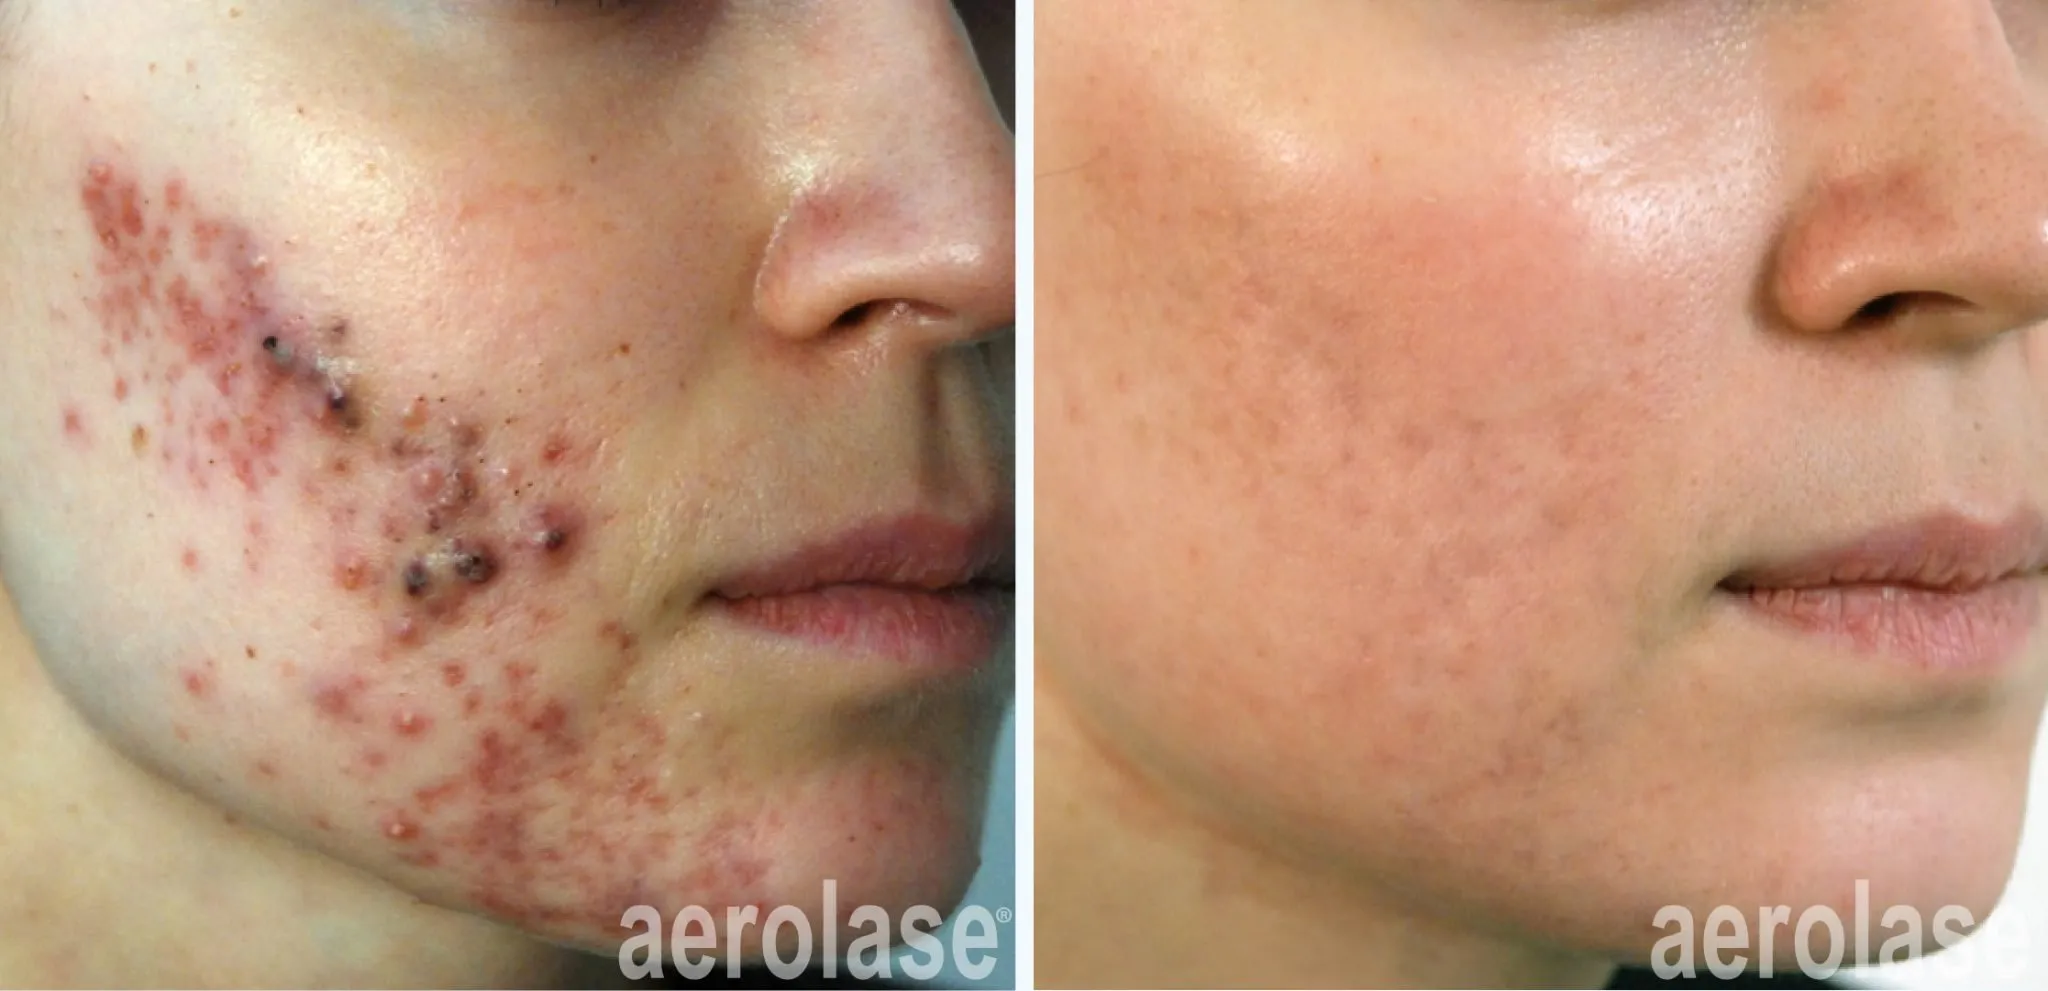 acne-cheeks-with-isotretinoin-michael-gold-before-and-after